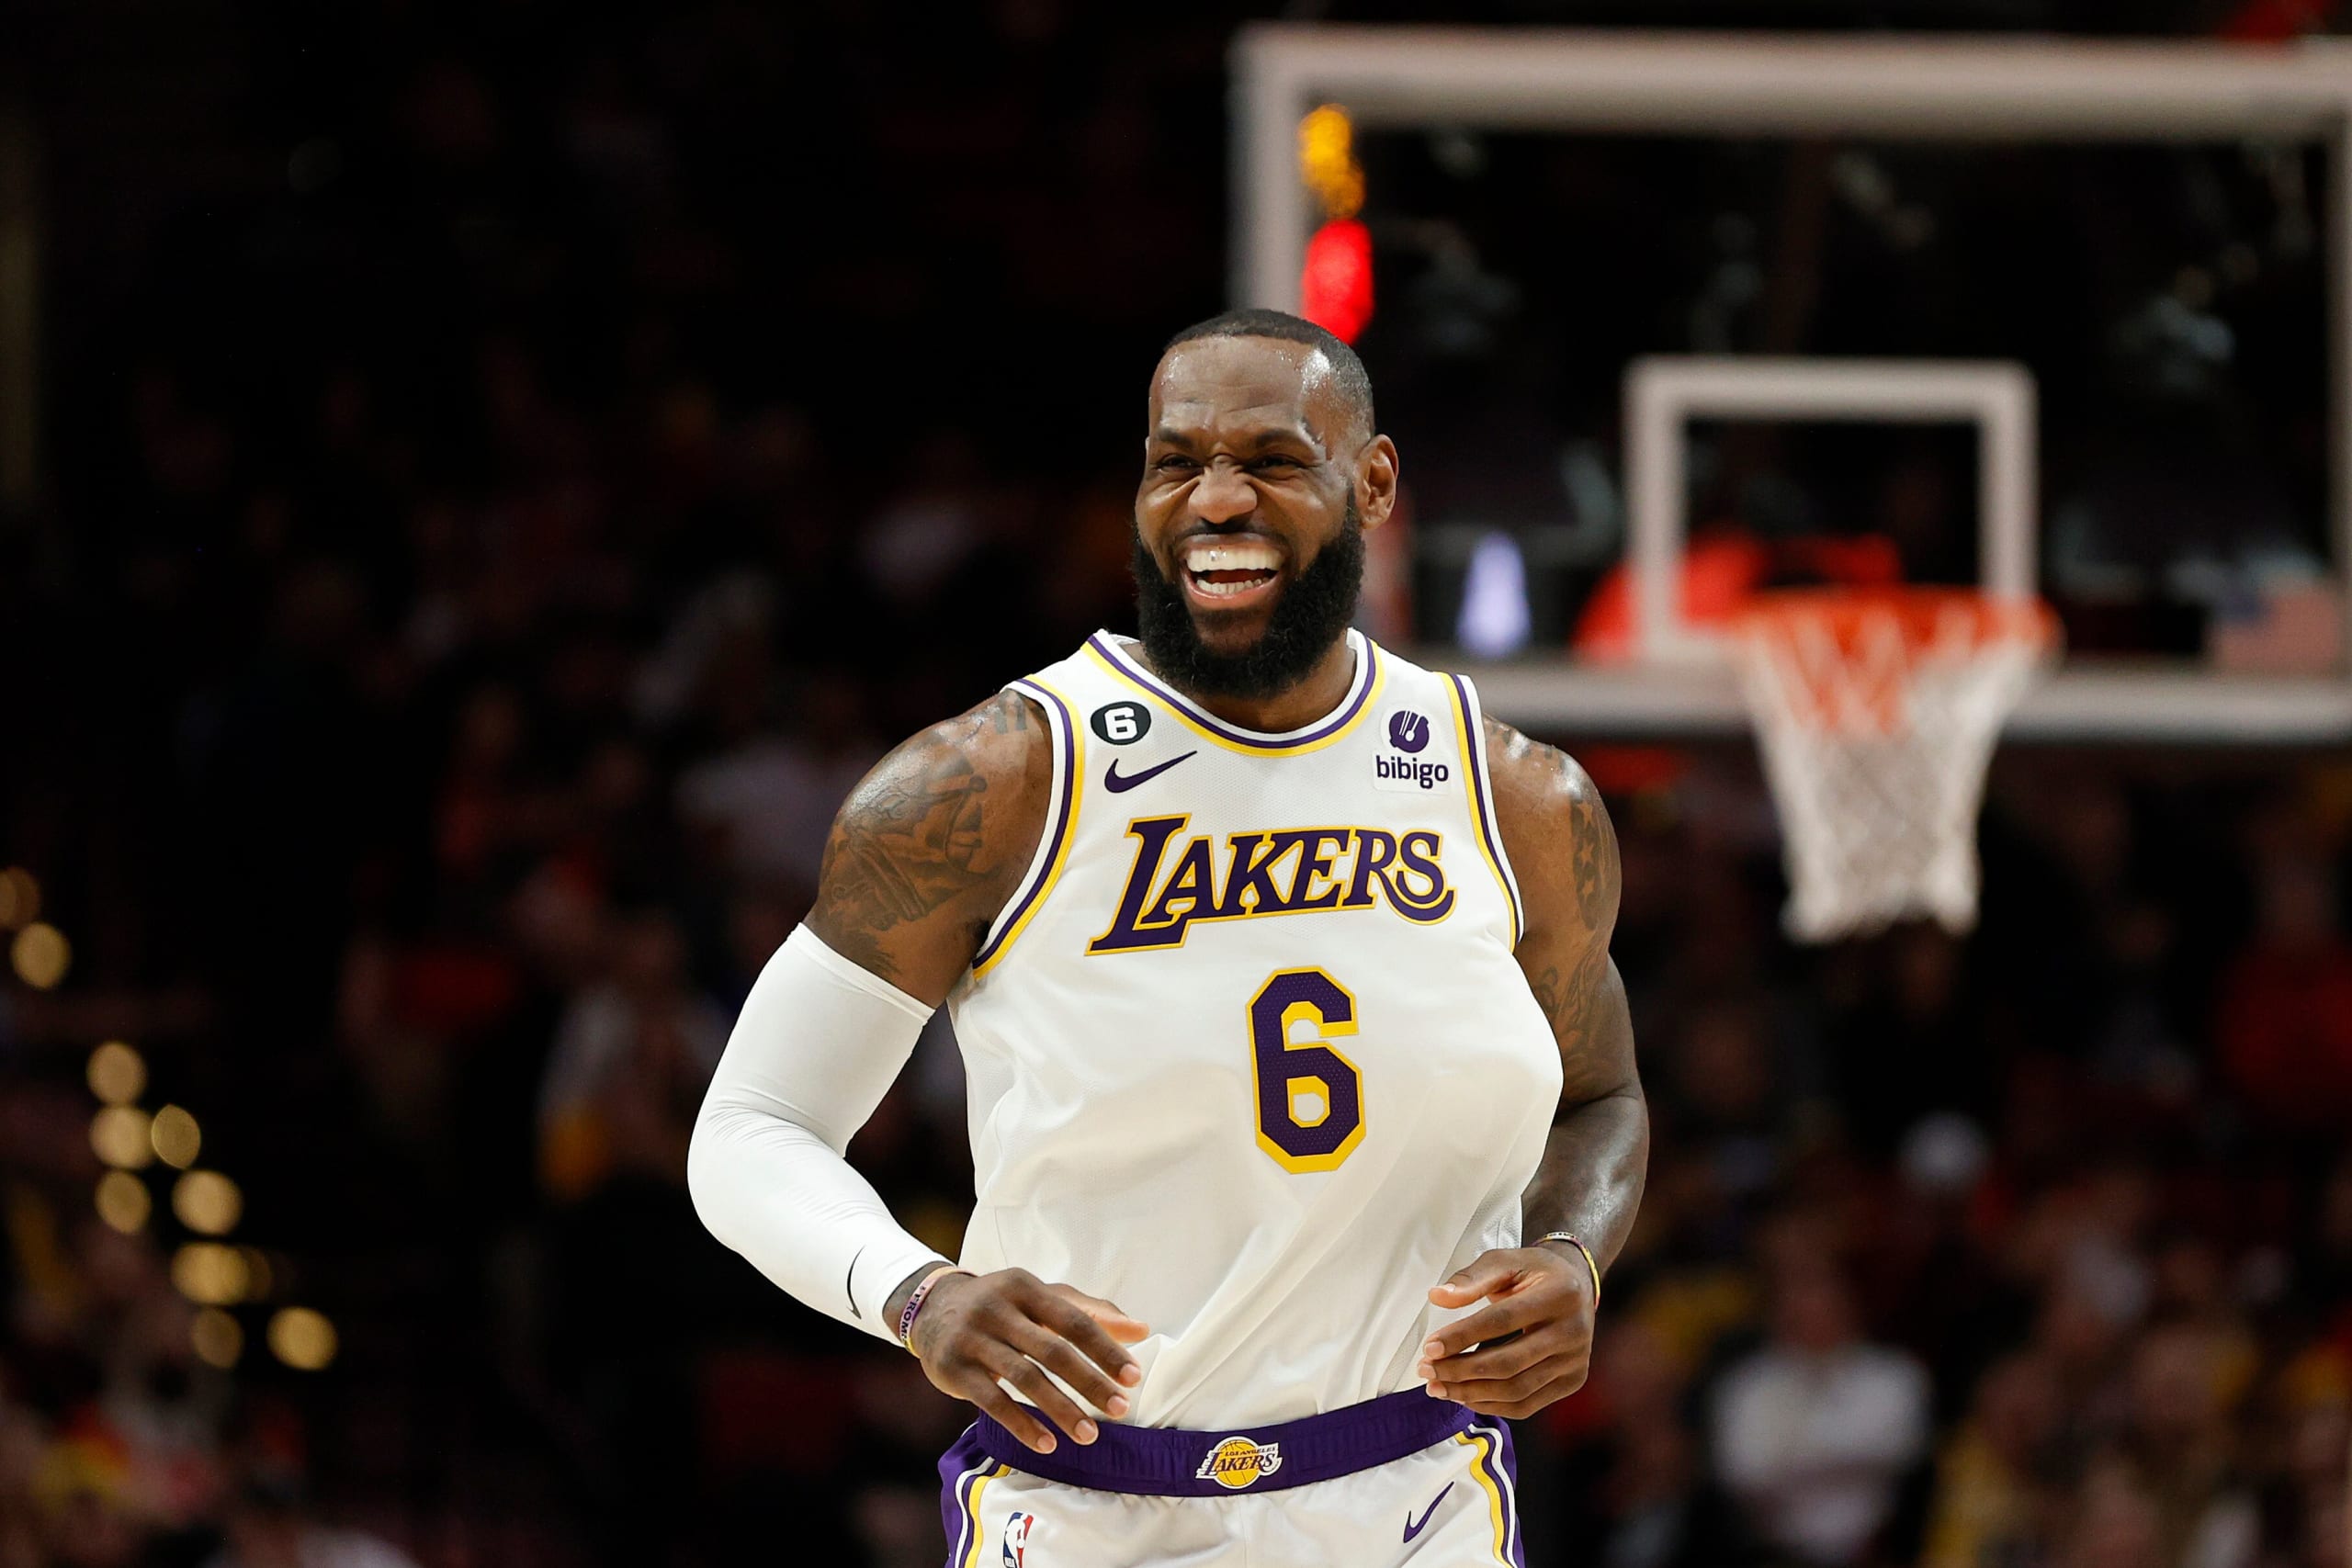 As LeBron inches toward Kareem’s record, ticket prices jump. We’re talking $75,000 for one seat